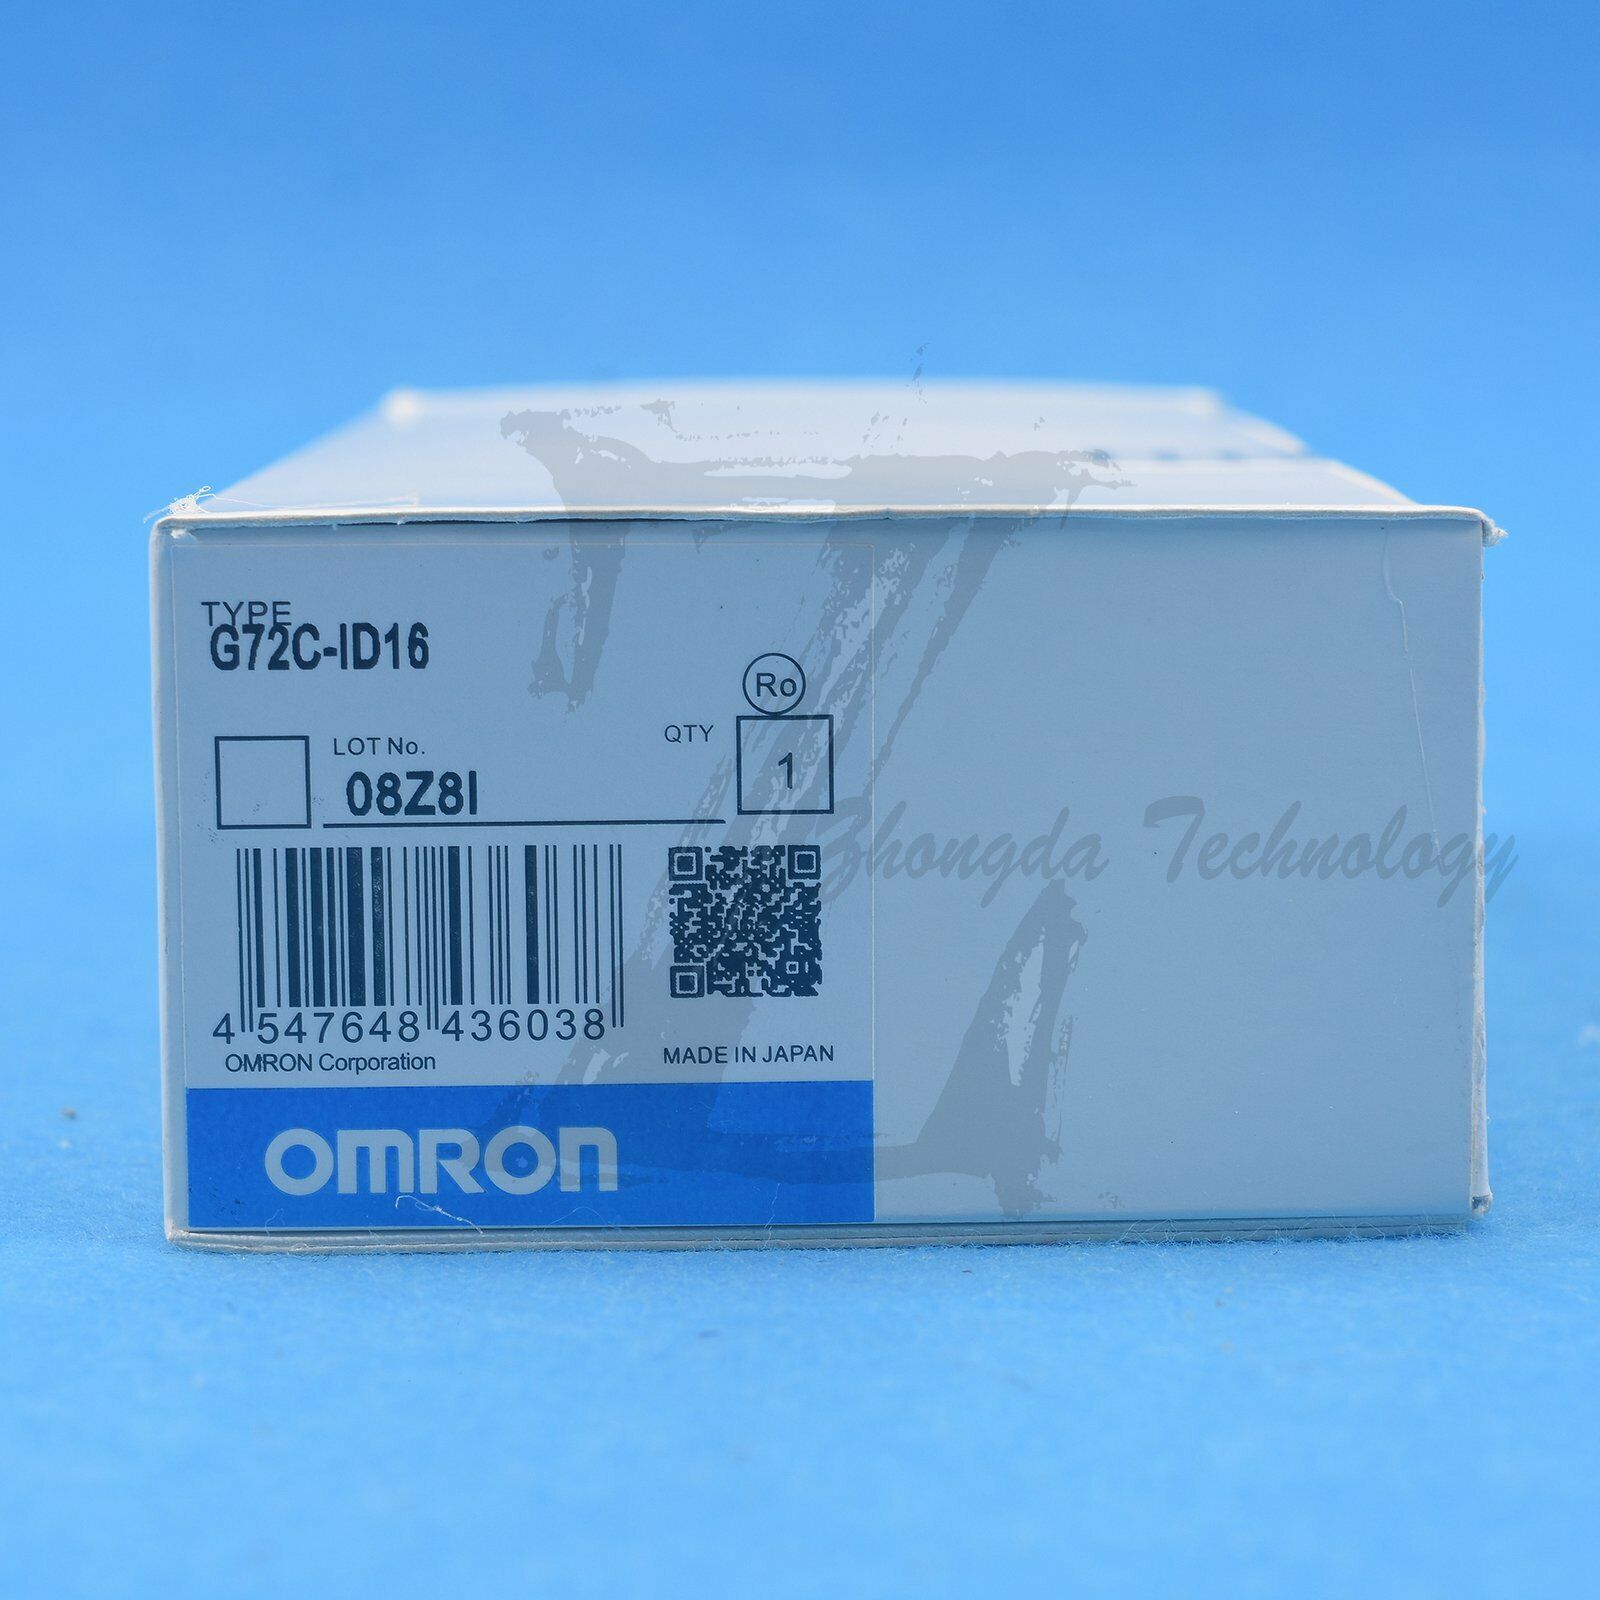 NEW Omron G72C-ID16 PLC programmable controller